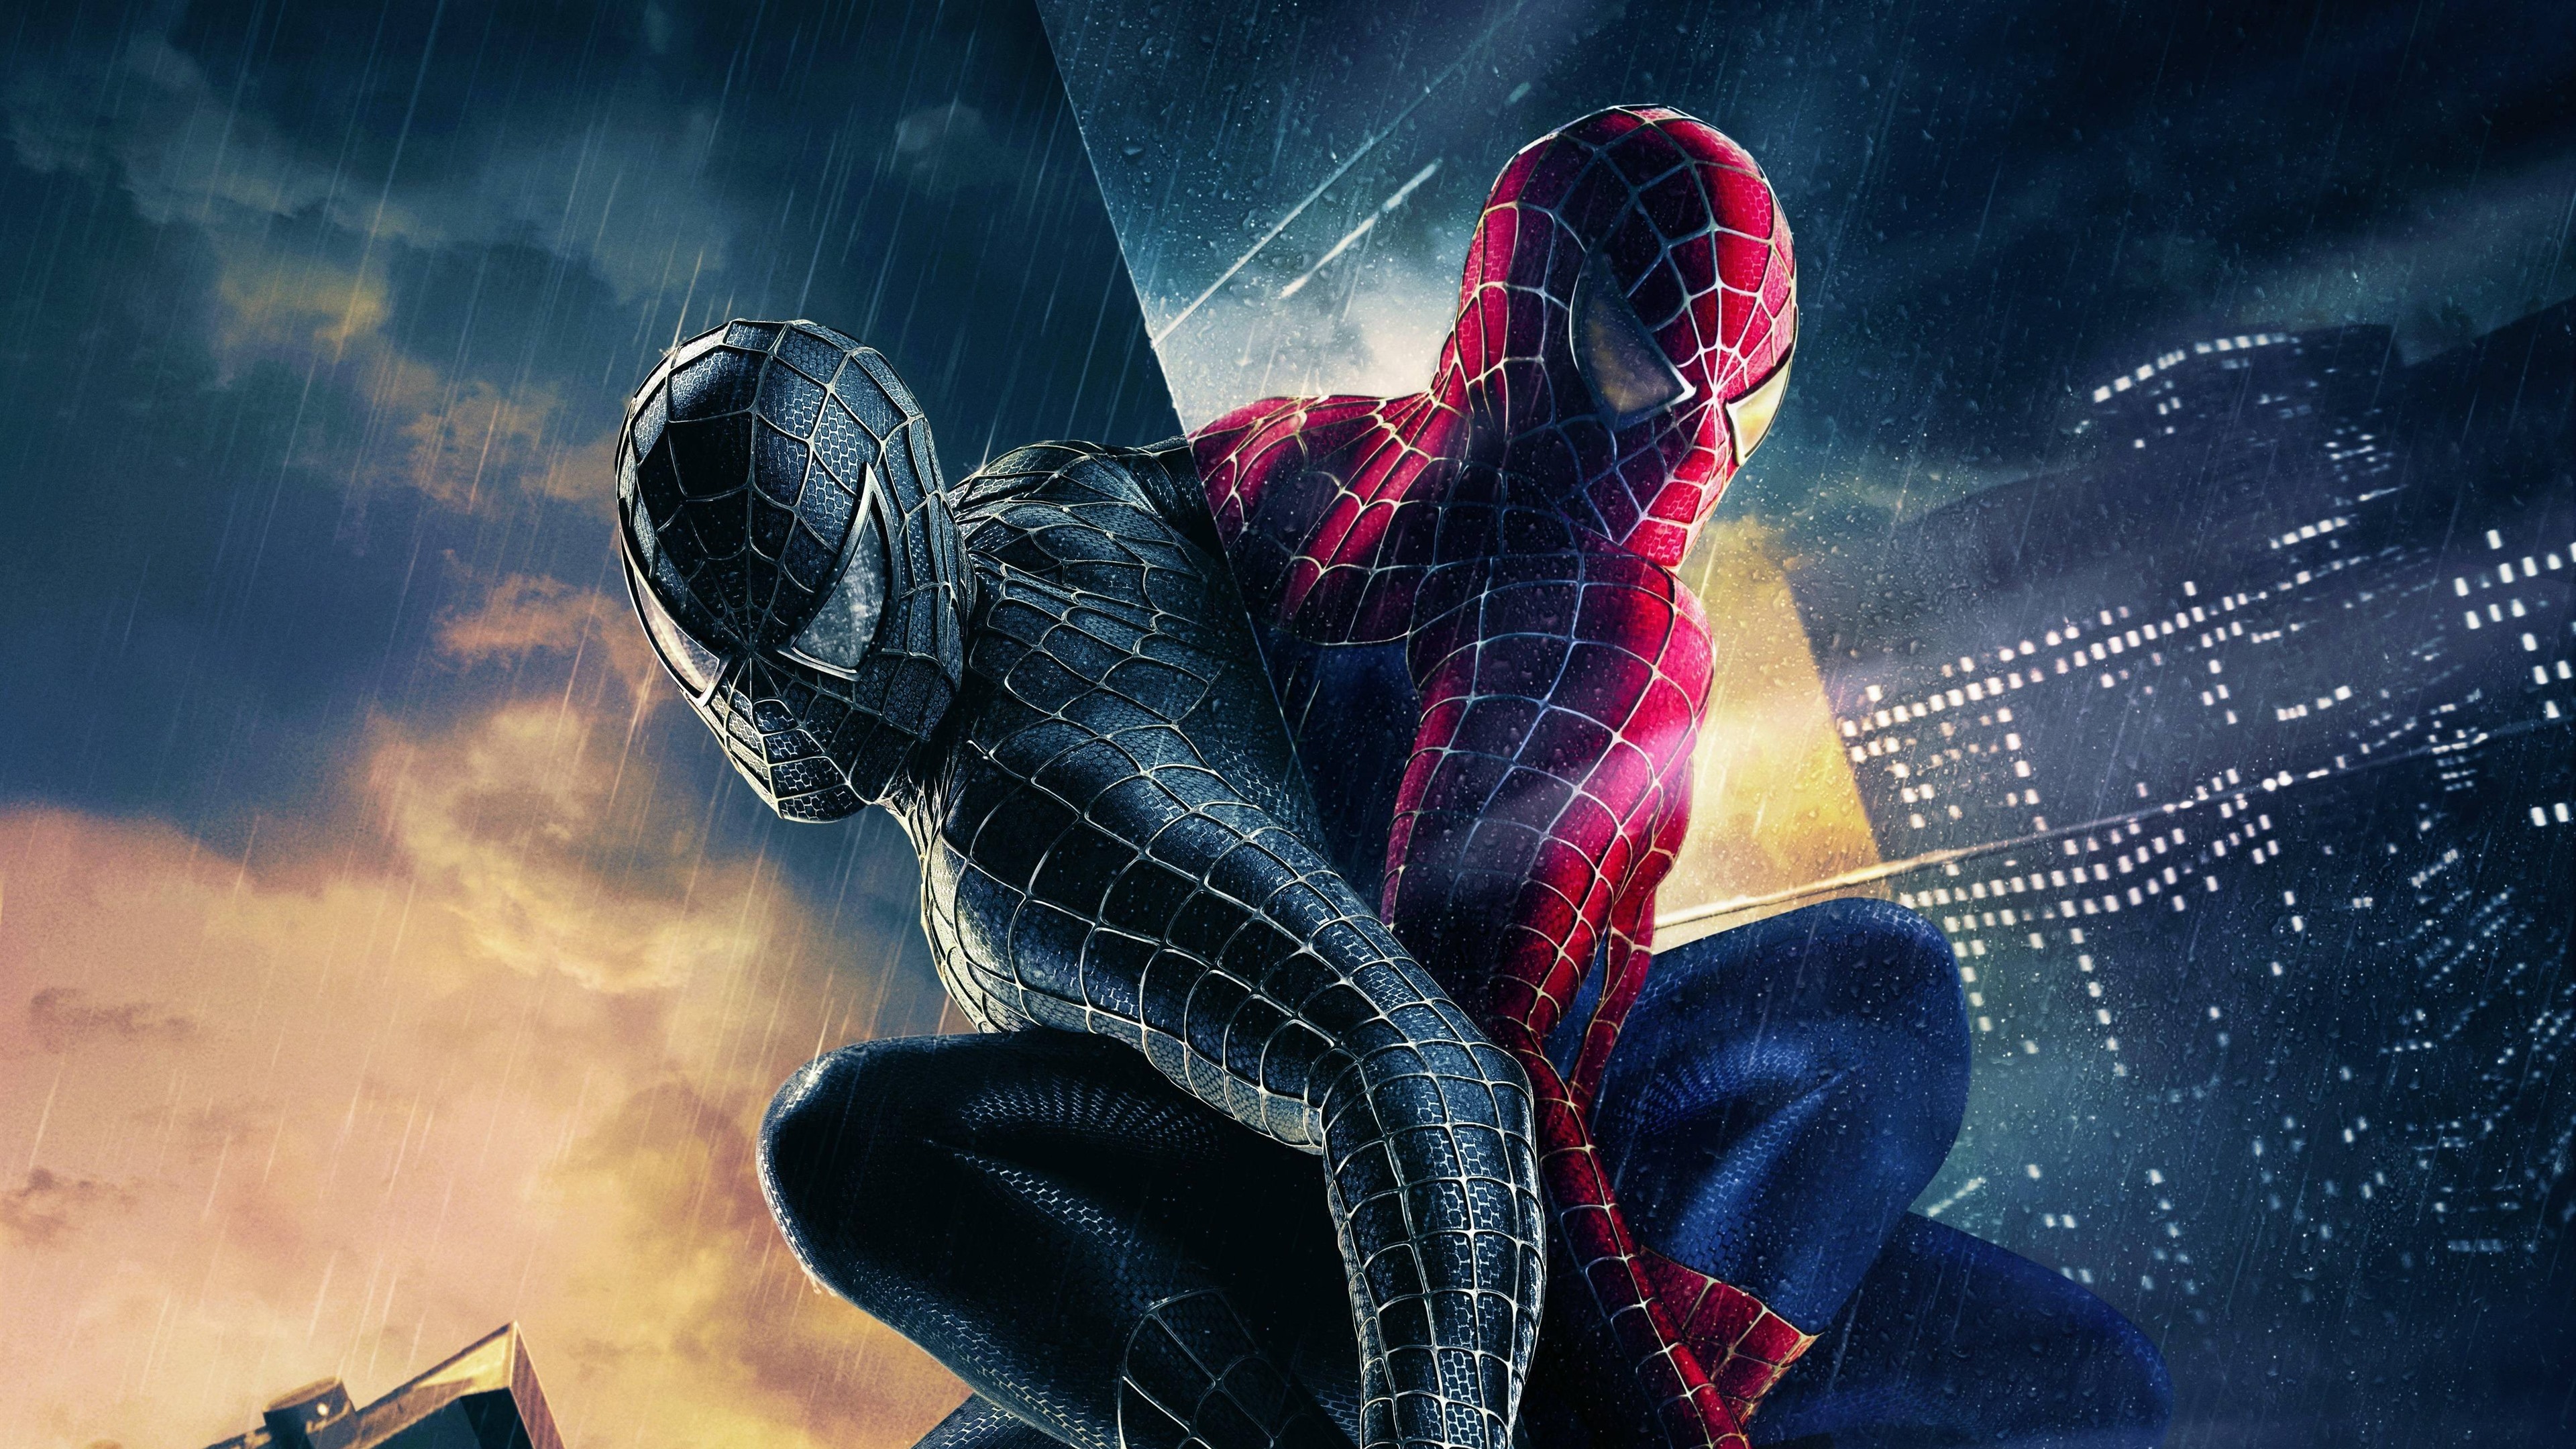 Spider man-black and red-3840x2160.jpg